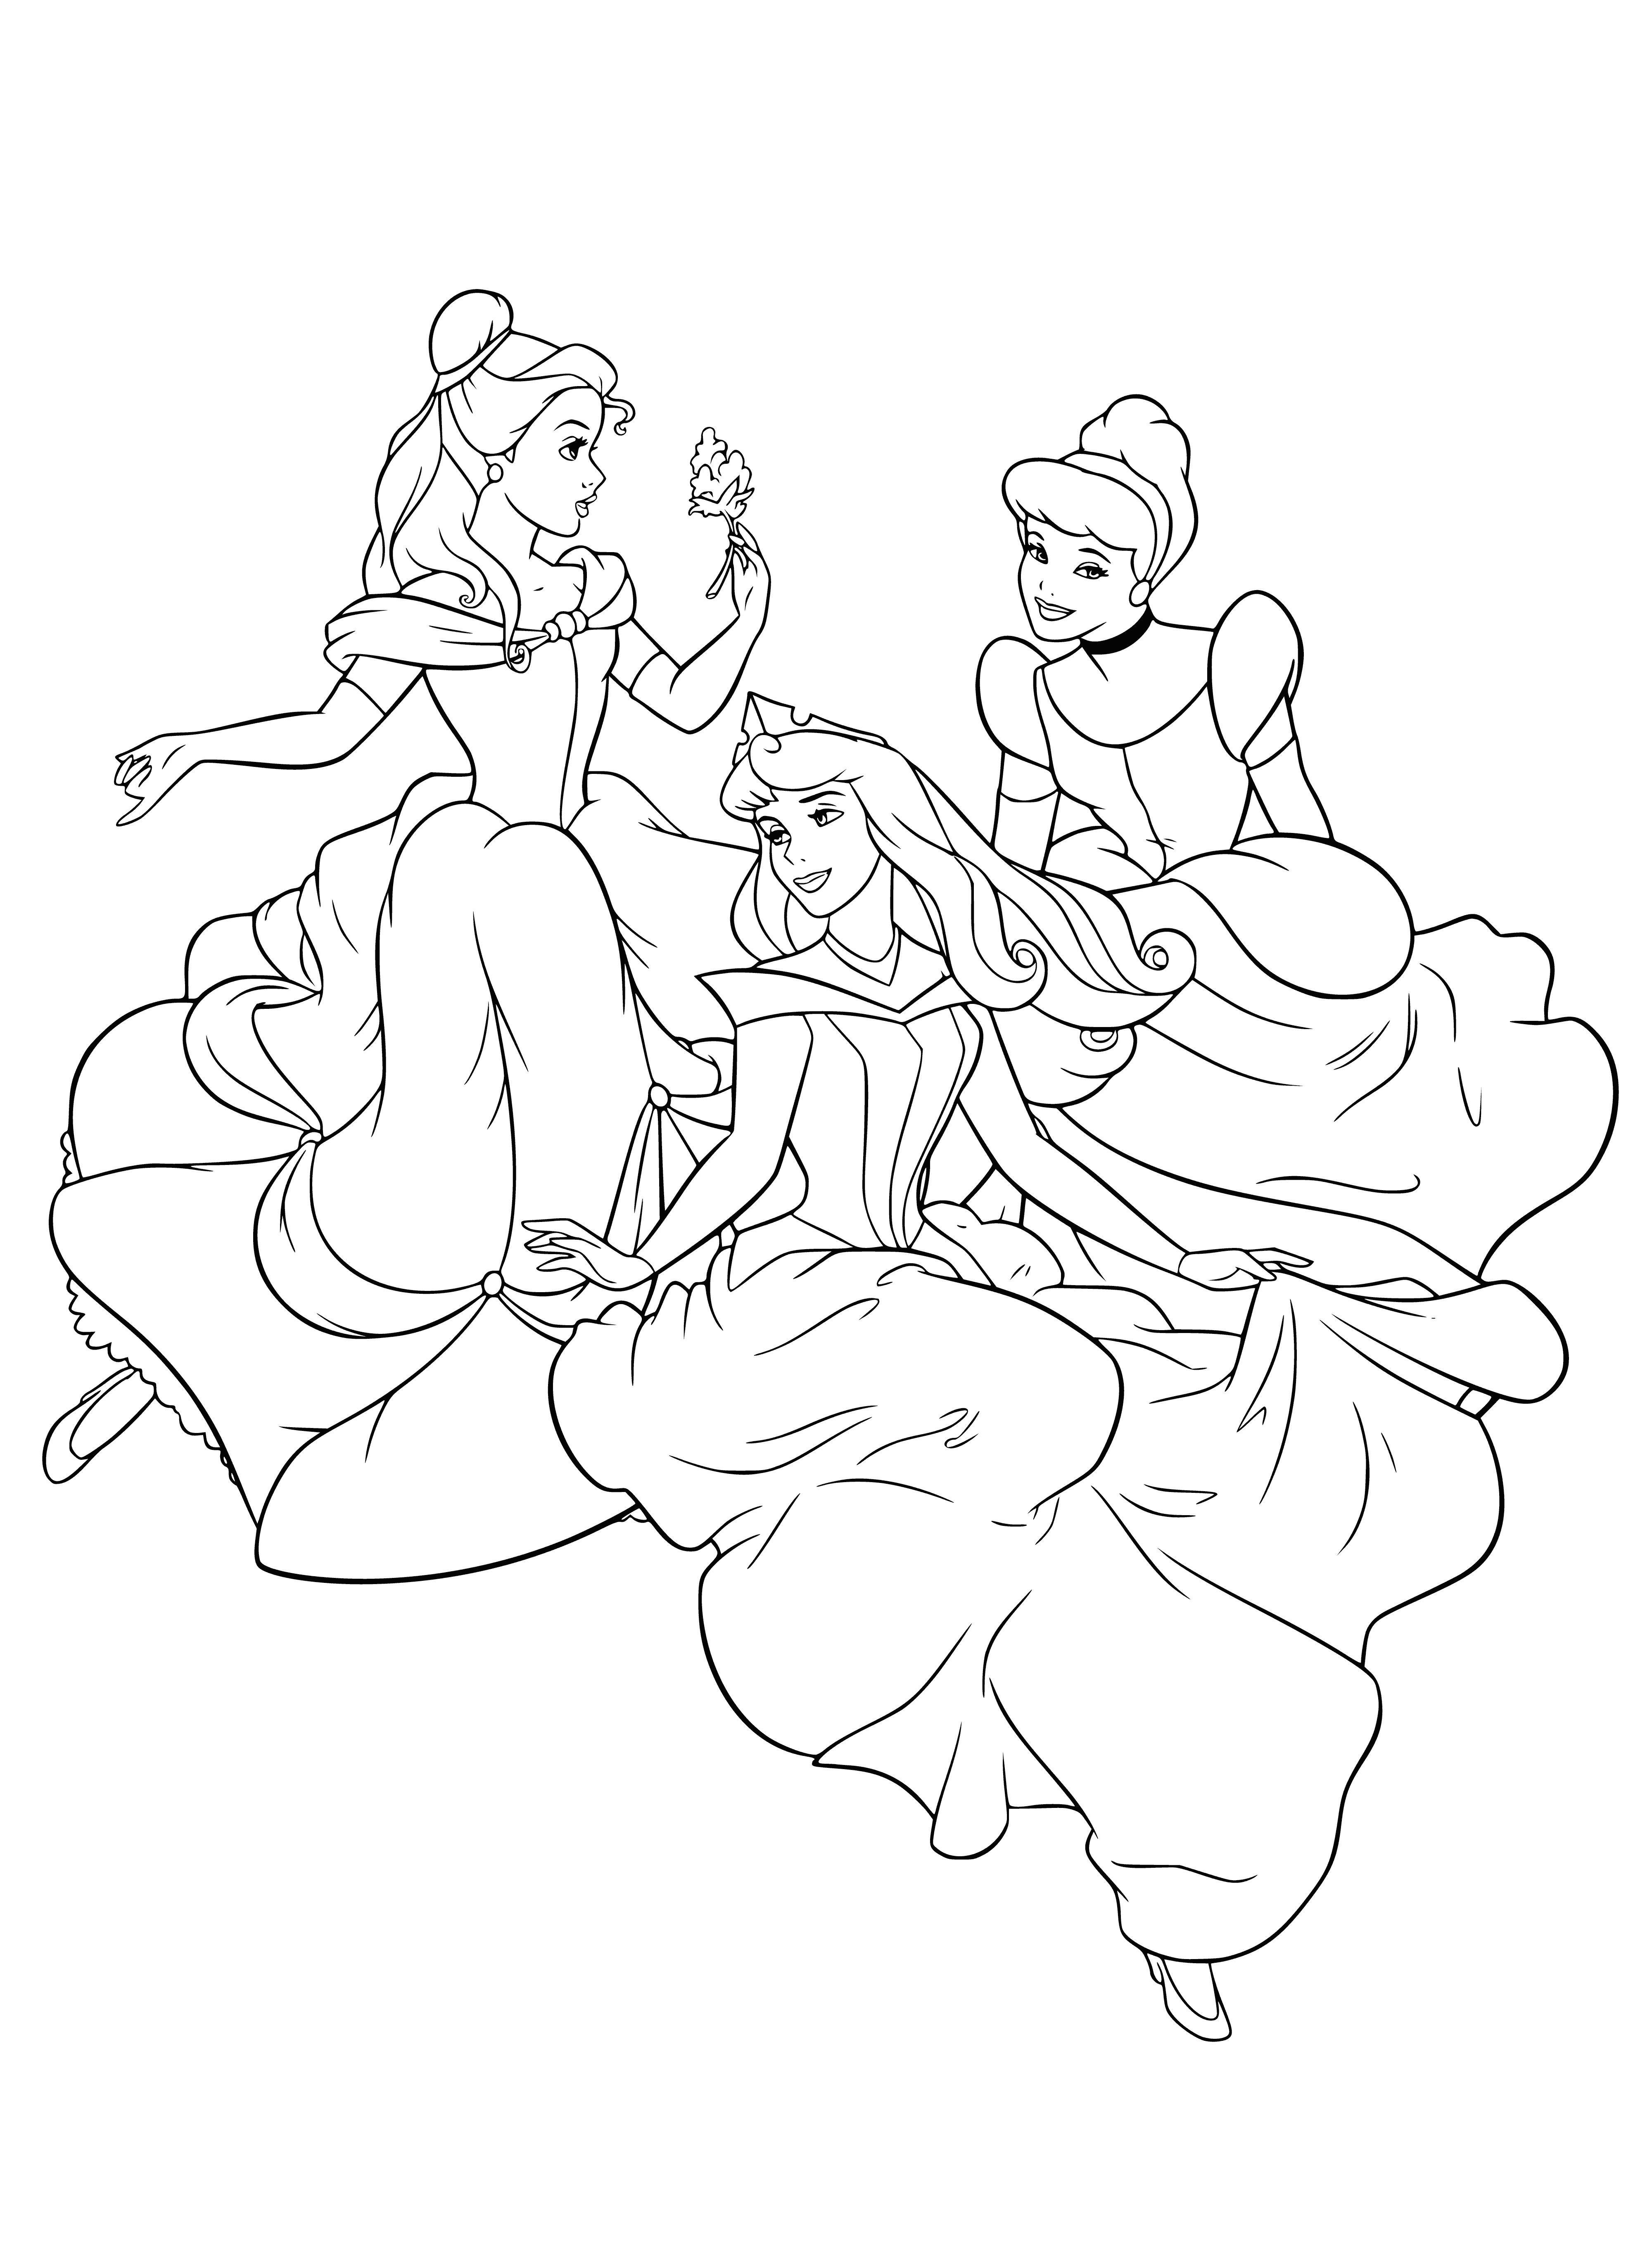 coloring page: Beautiful princesses Belle, Aurora, and Cinderella have long hair and different colored gowns with blue or white sashes.